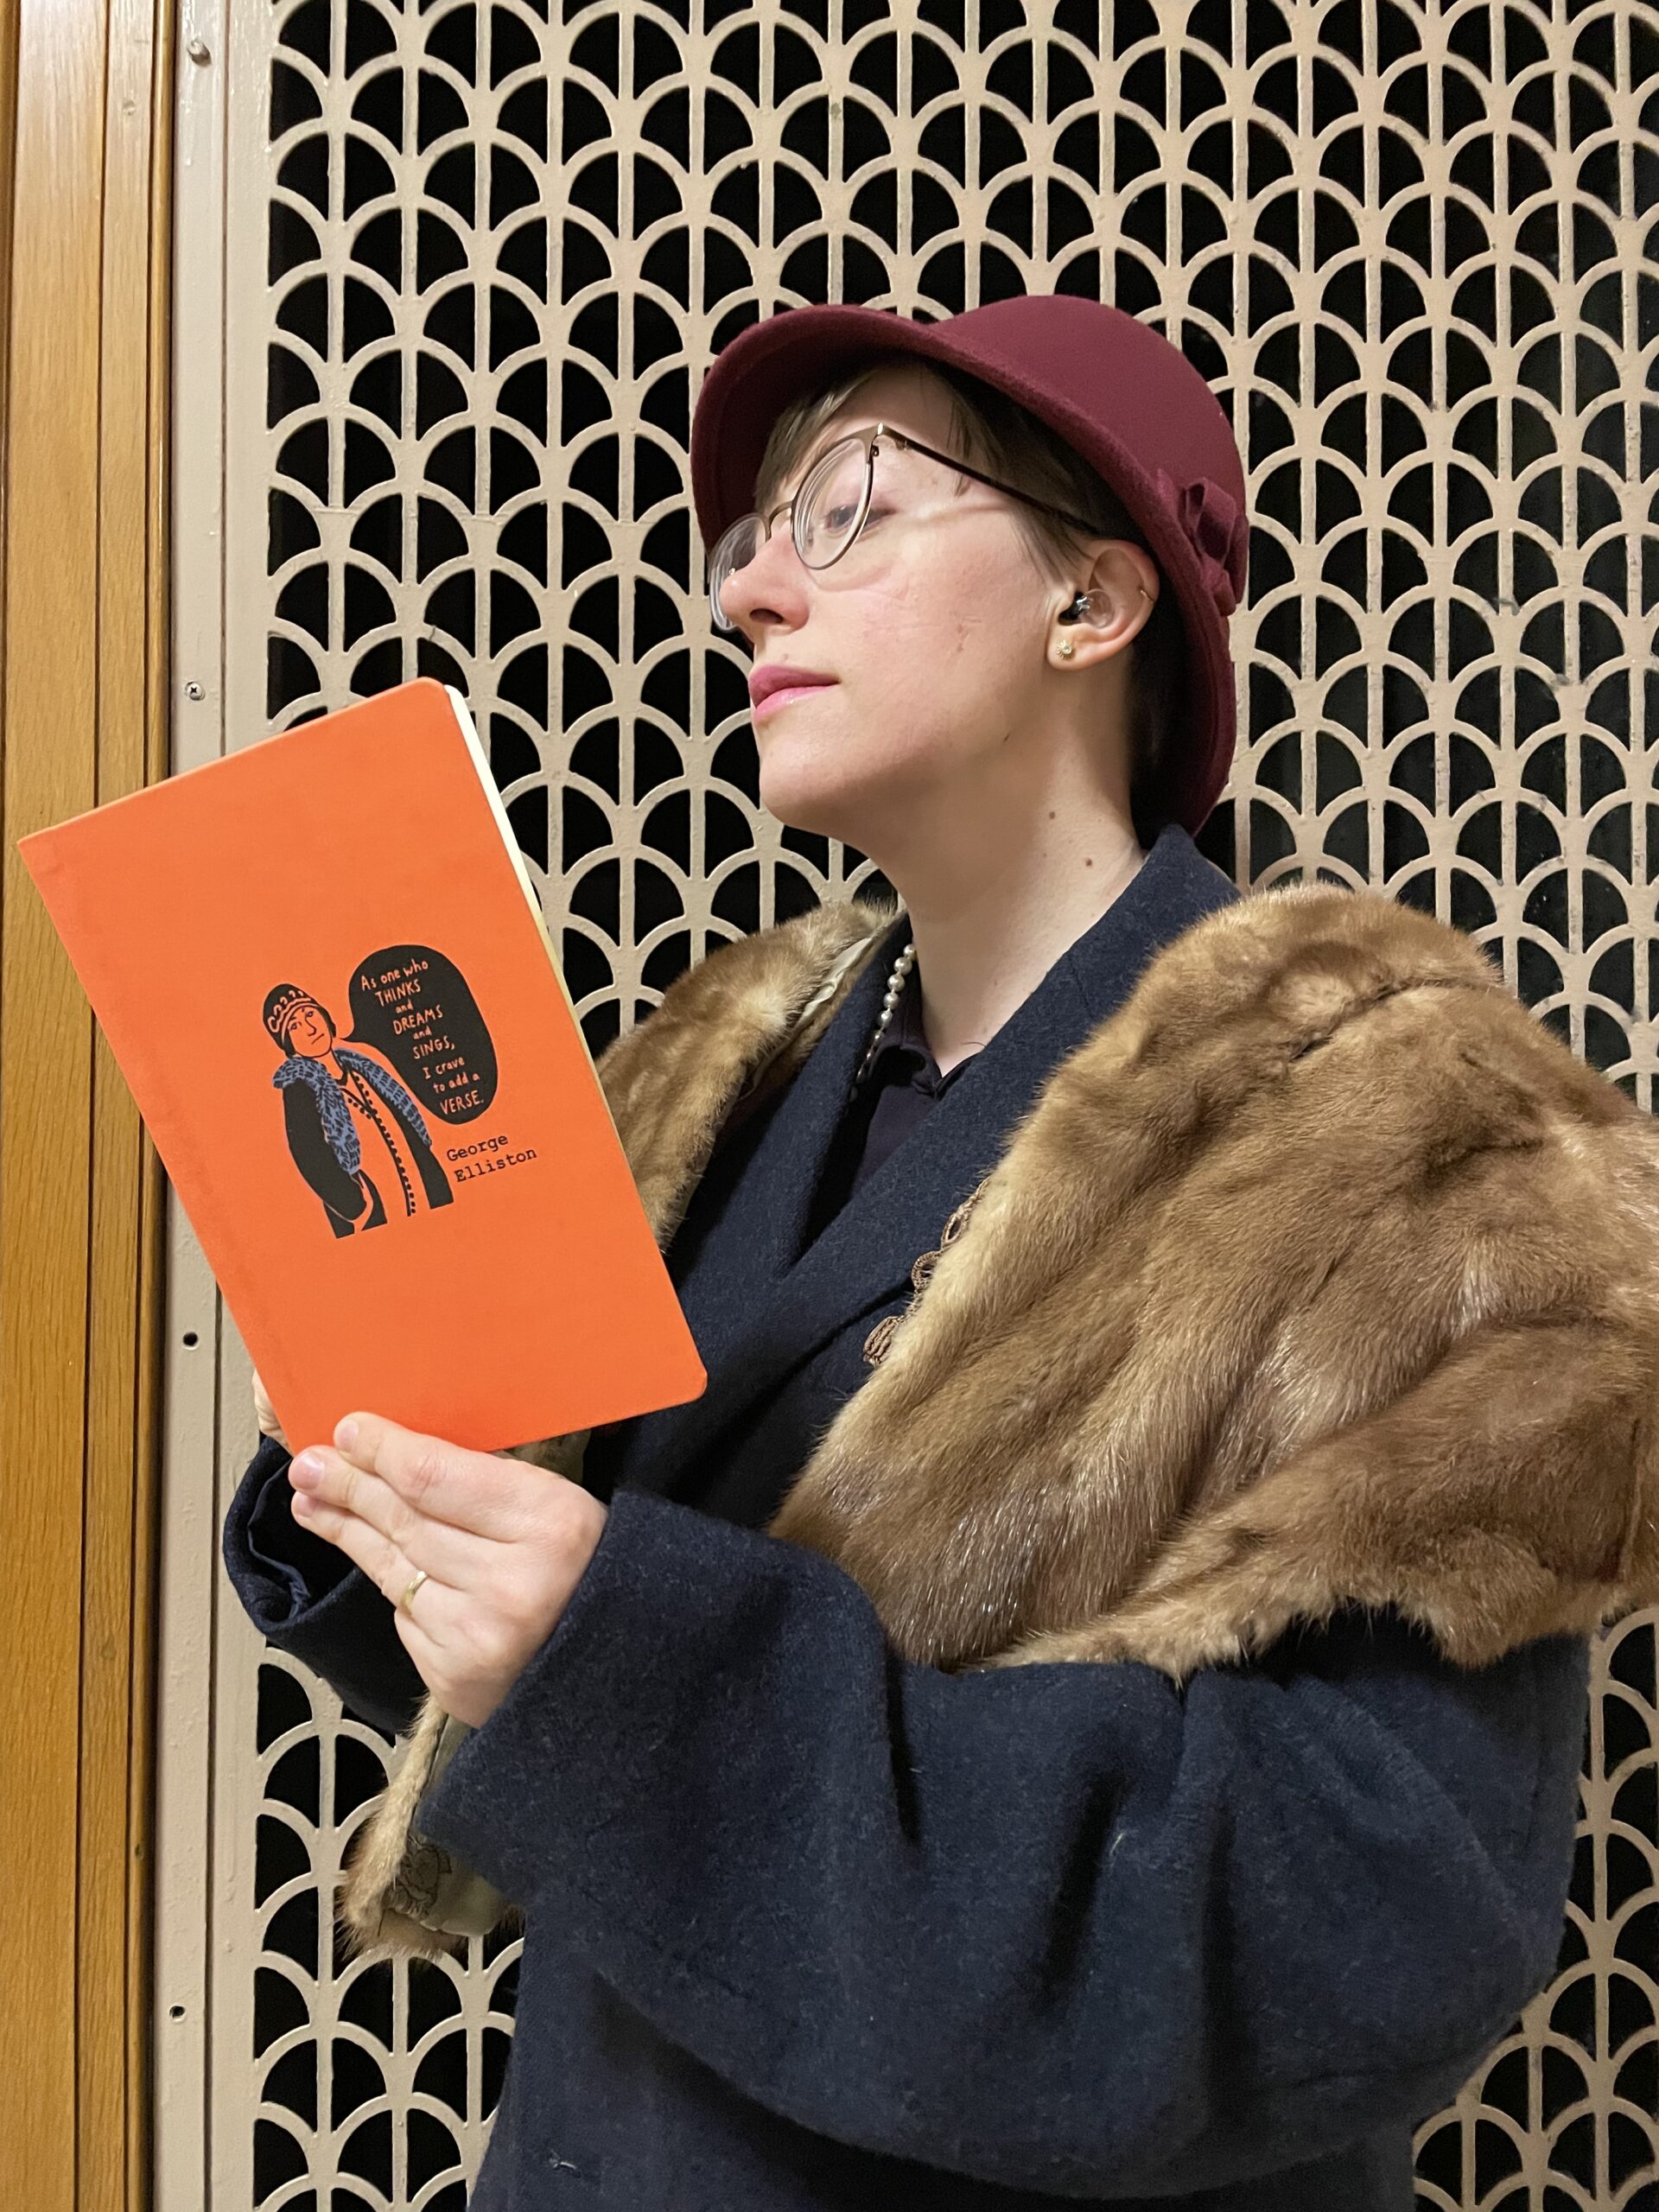 Assistant Editor Lily Davenport dressed in a circa-1920s George Elliston costume, with maroon cloche, blue coat, brown mink stole, and long string of pearls. She stands in profile in front of a deco-style grate and reads from CR's perfect-bound orange notebook.